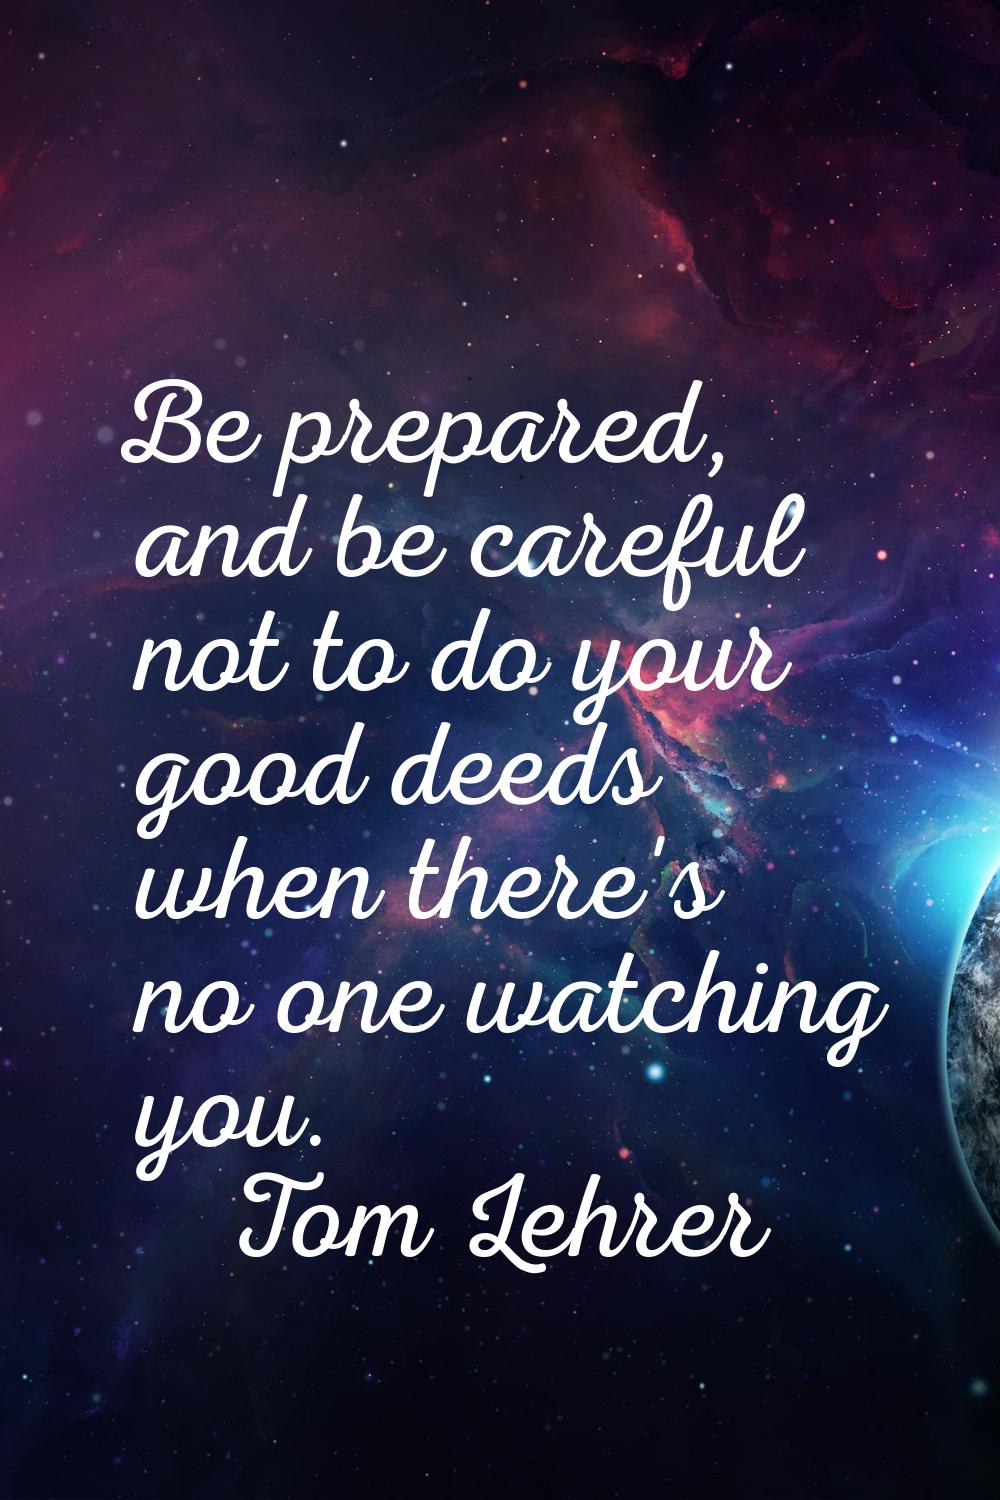 Be prepared, and be careful not to do your good deeds when there's no one watching you.